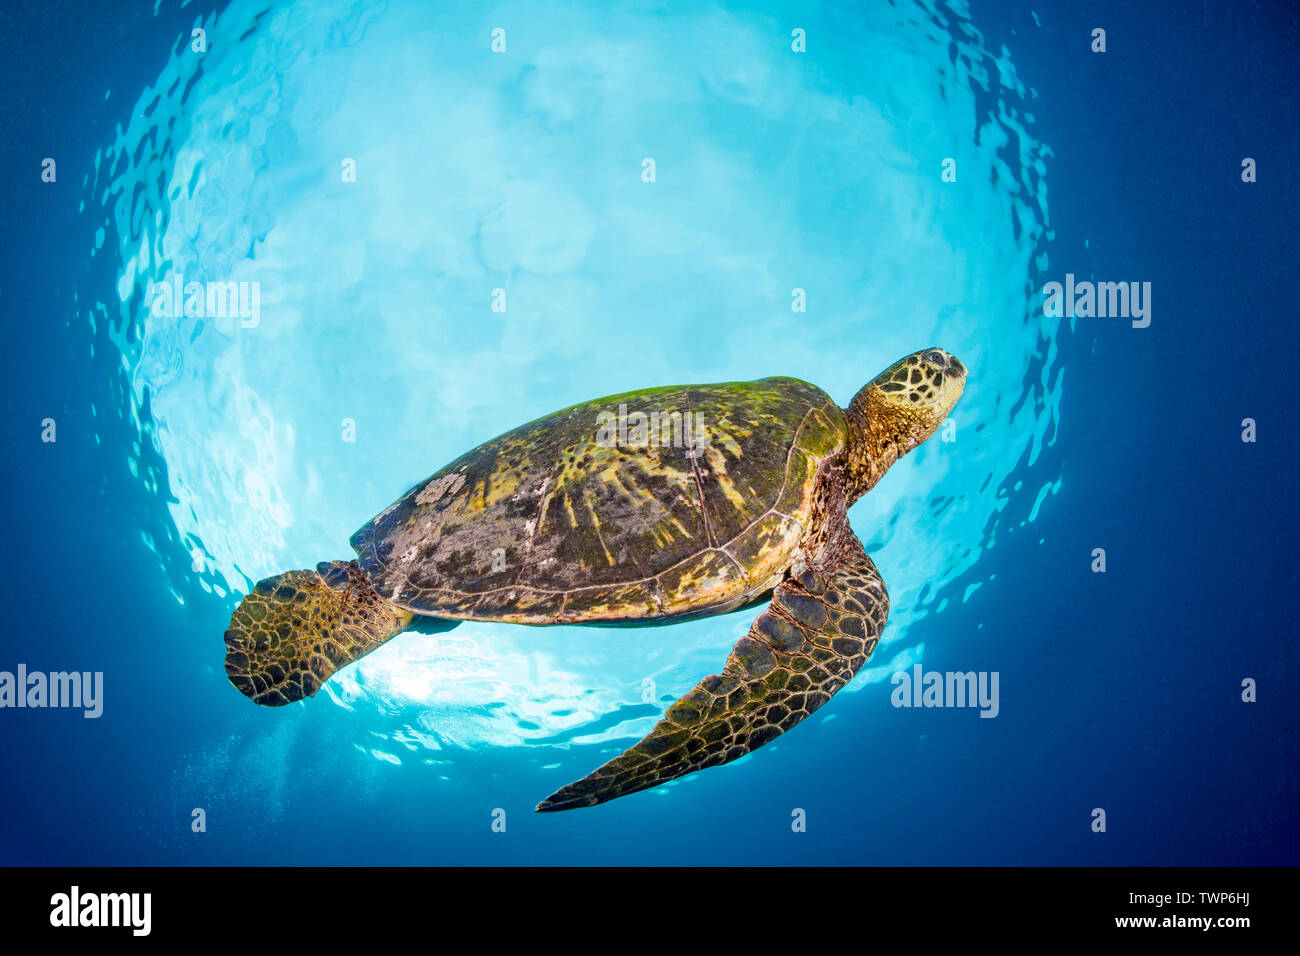 A green sea turtle, Chelonia mydas, an endangered species, is framed in Snells Window, and effect created by shooting up at the surface, Maui, Hawaii. Stock Photo